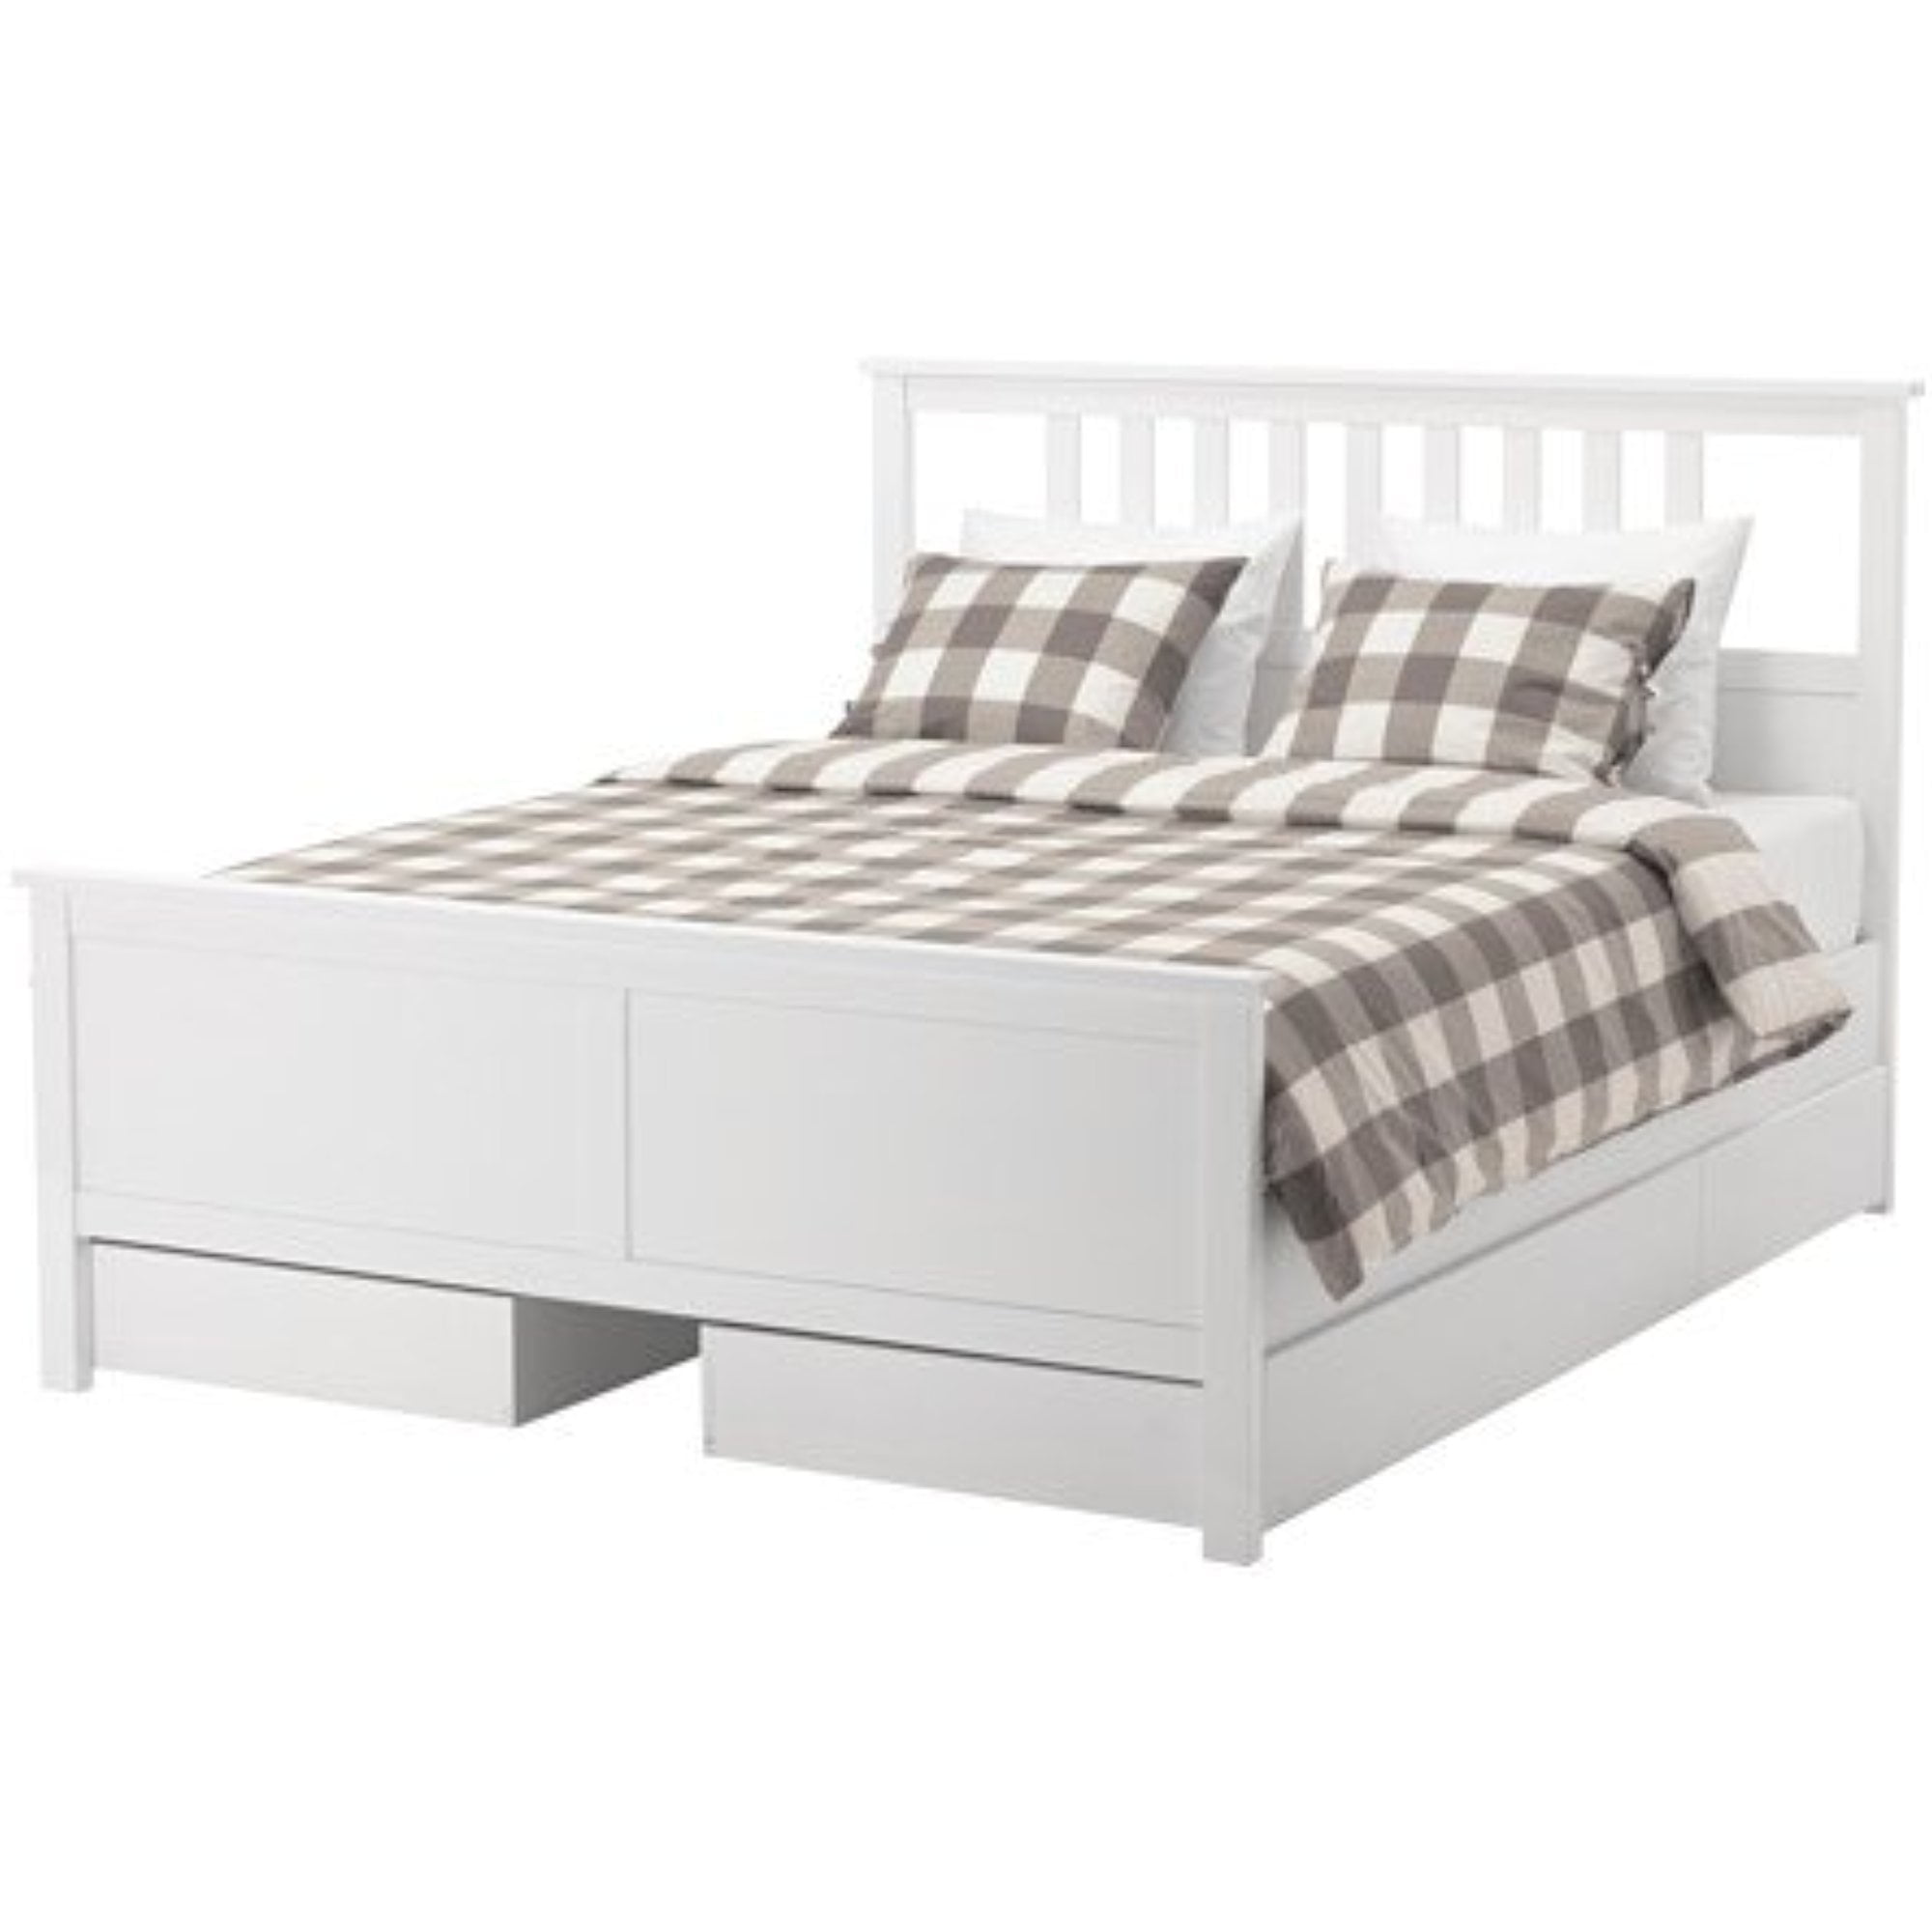 Ikea King Size Bed Frame With 4 Storage, King Size Bed Frame With Drawers Ikea